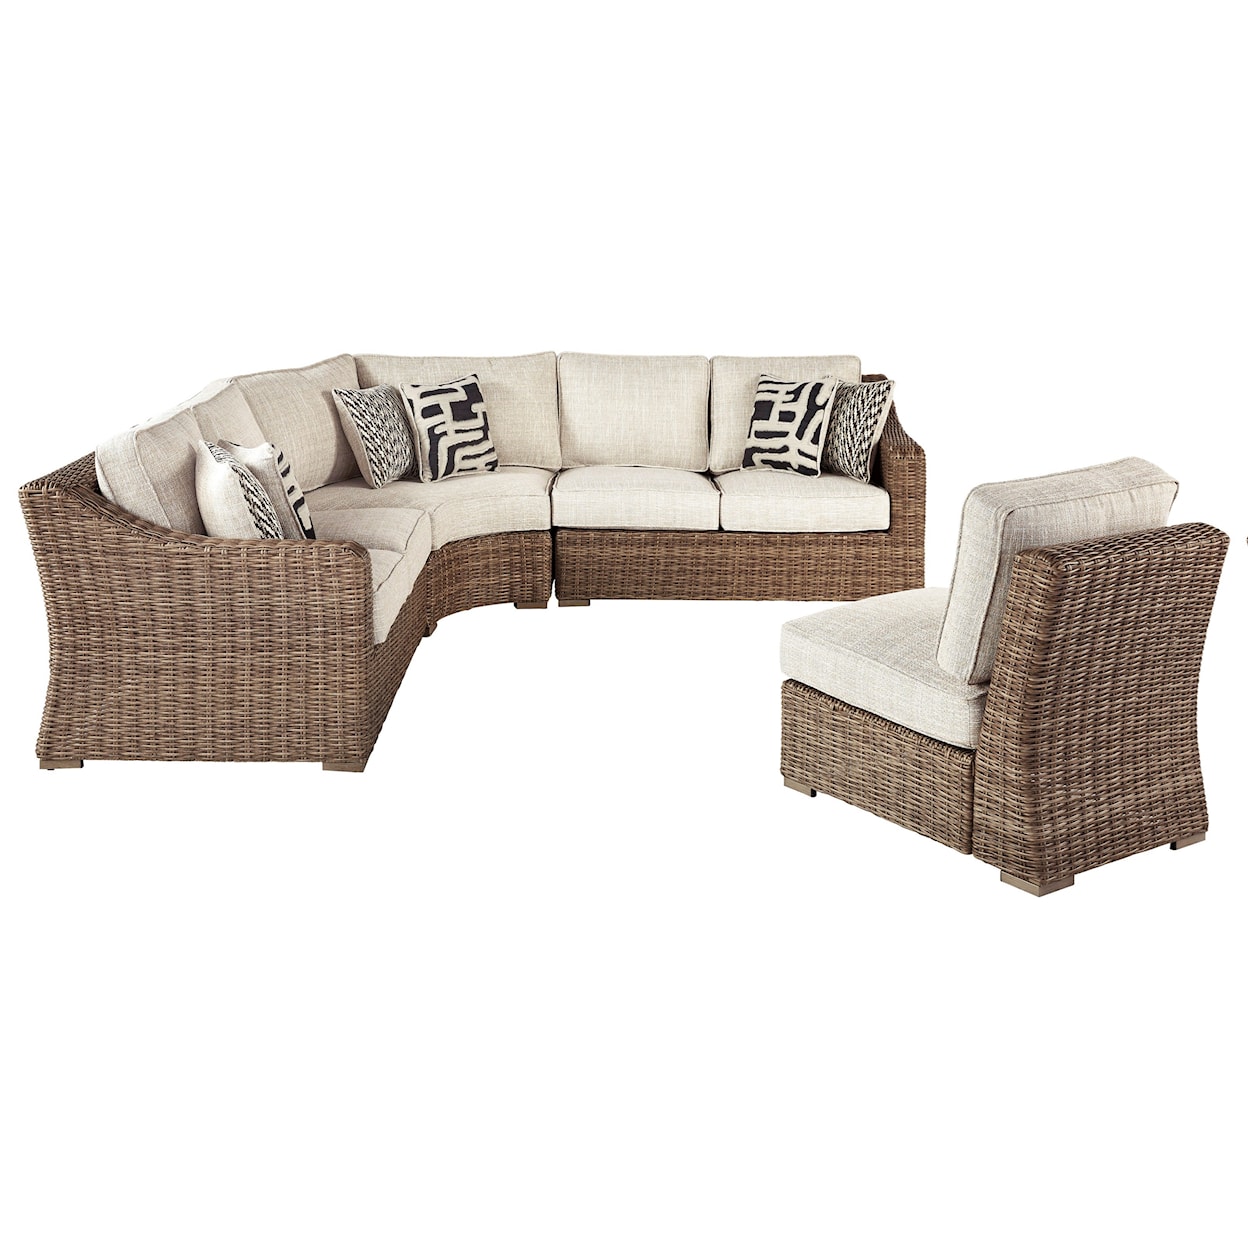 Belfort Select Bethany 3 Piece Sectional